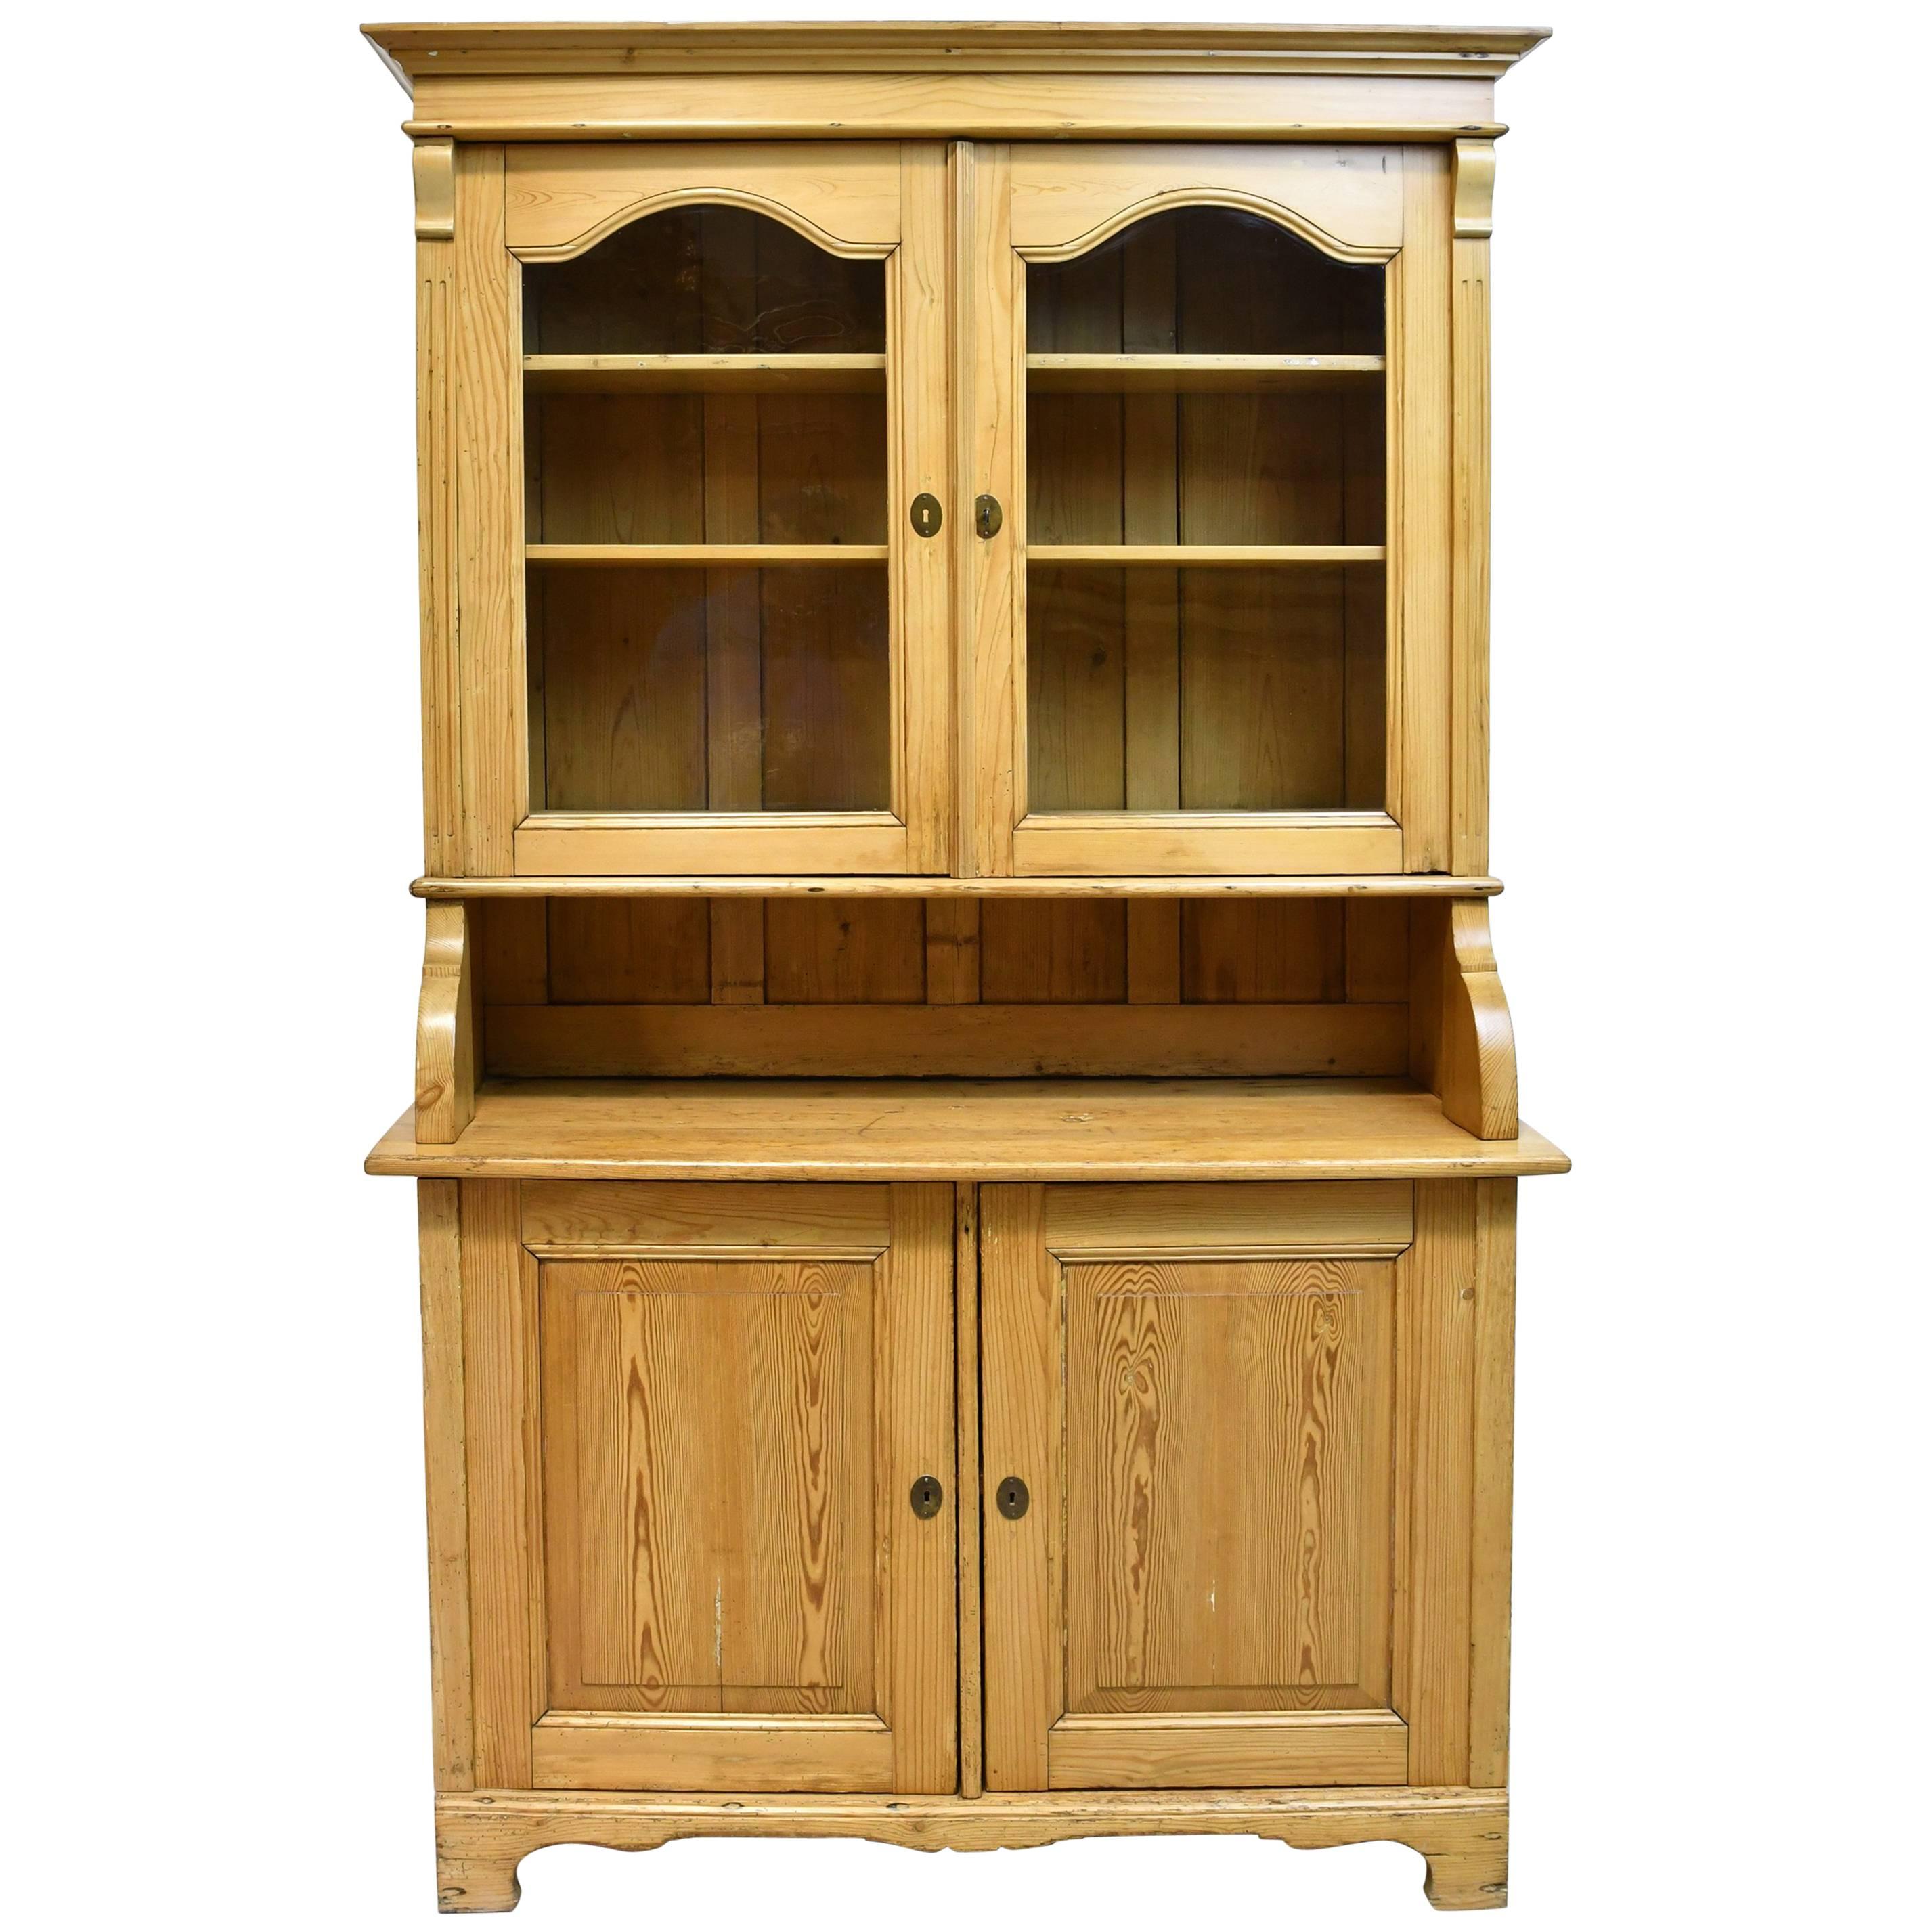 North German Pine Hutch with a Flight of Interior Drawers and Original Glass